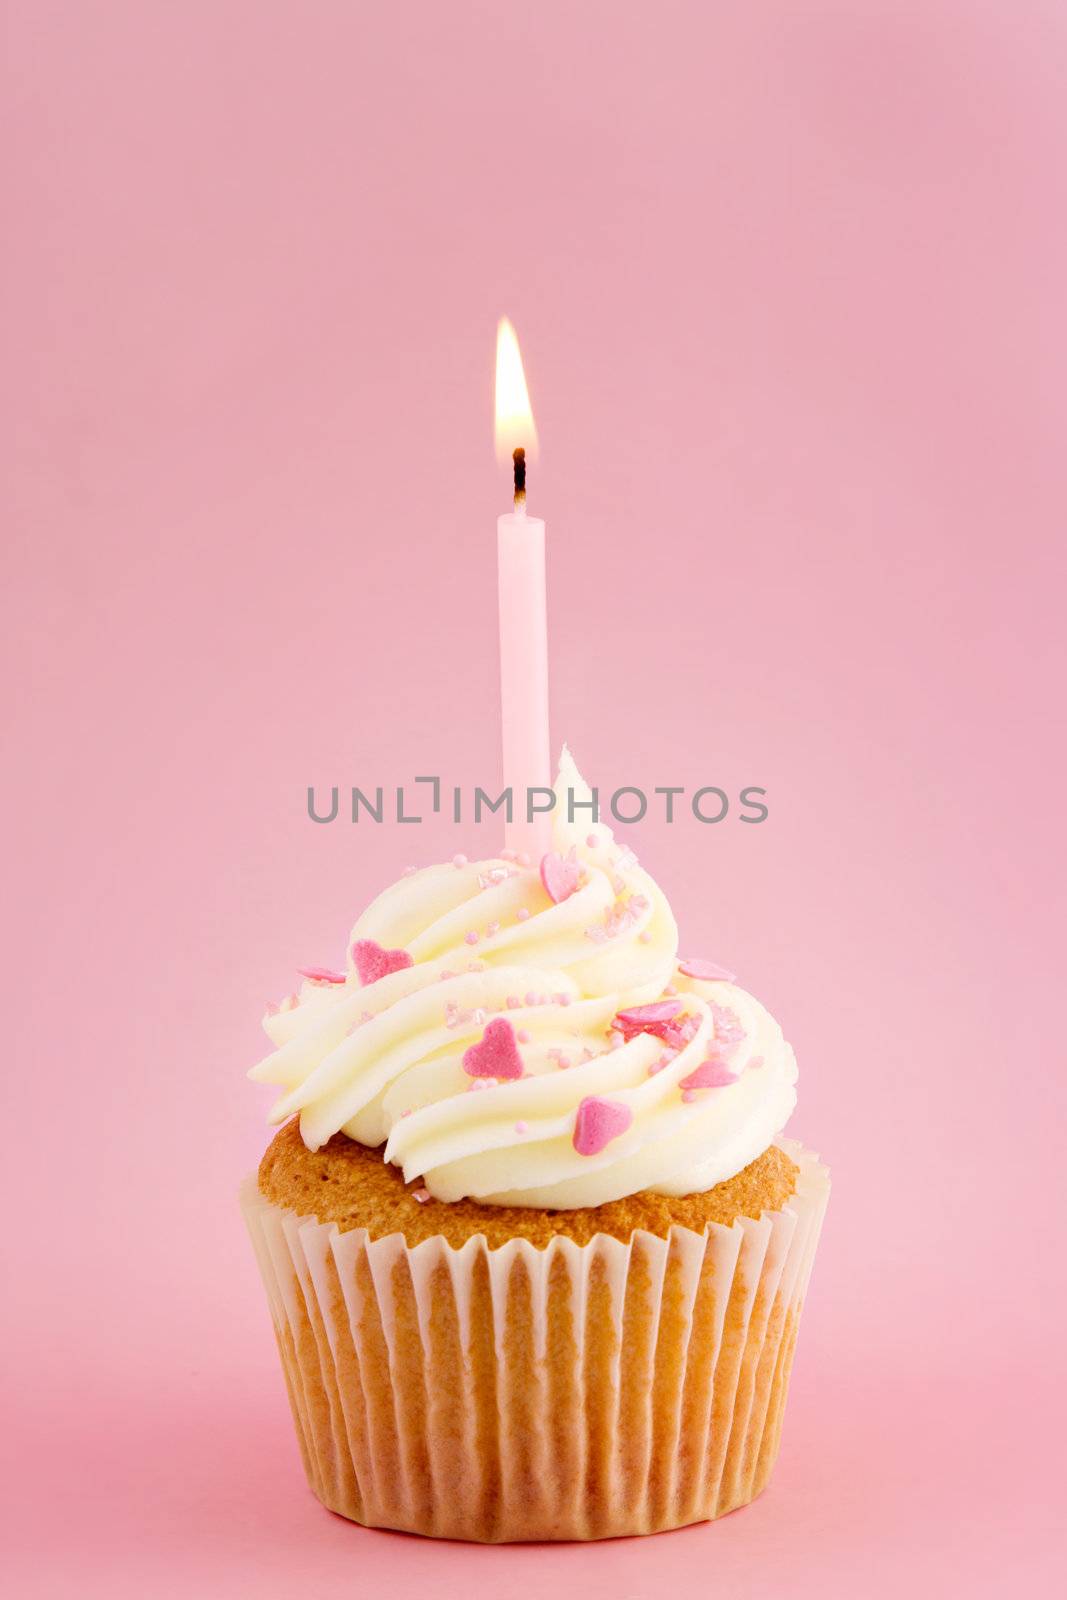 Cupcake decorated with pink sprinkles and a single candle